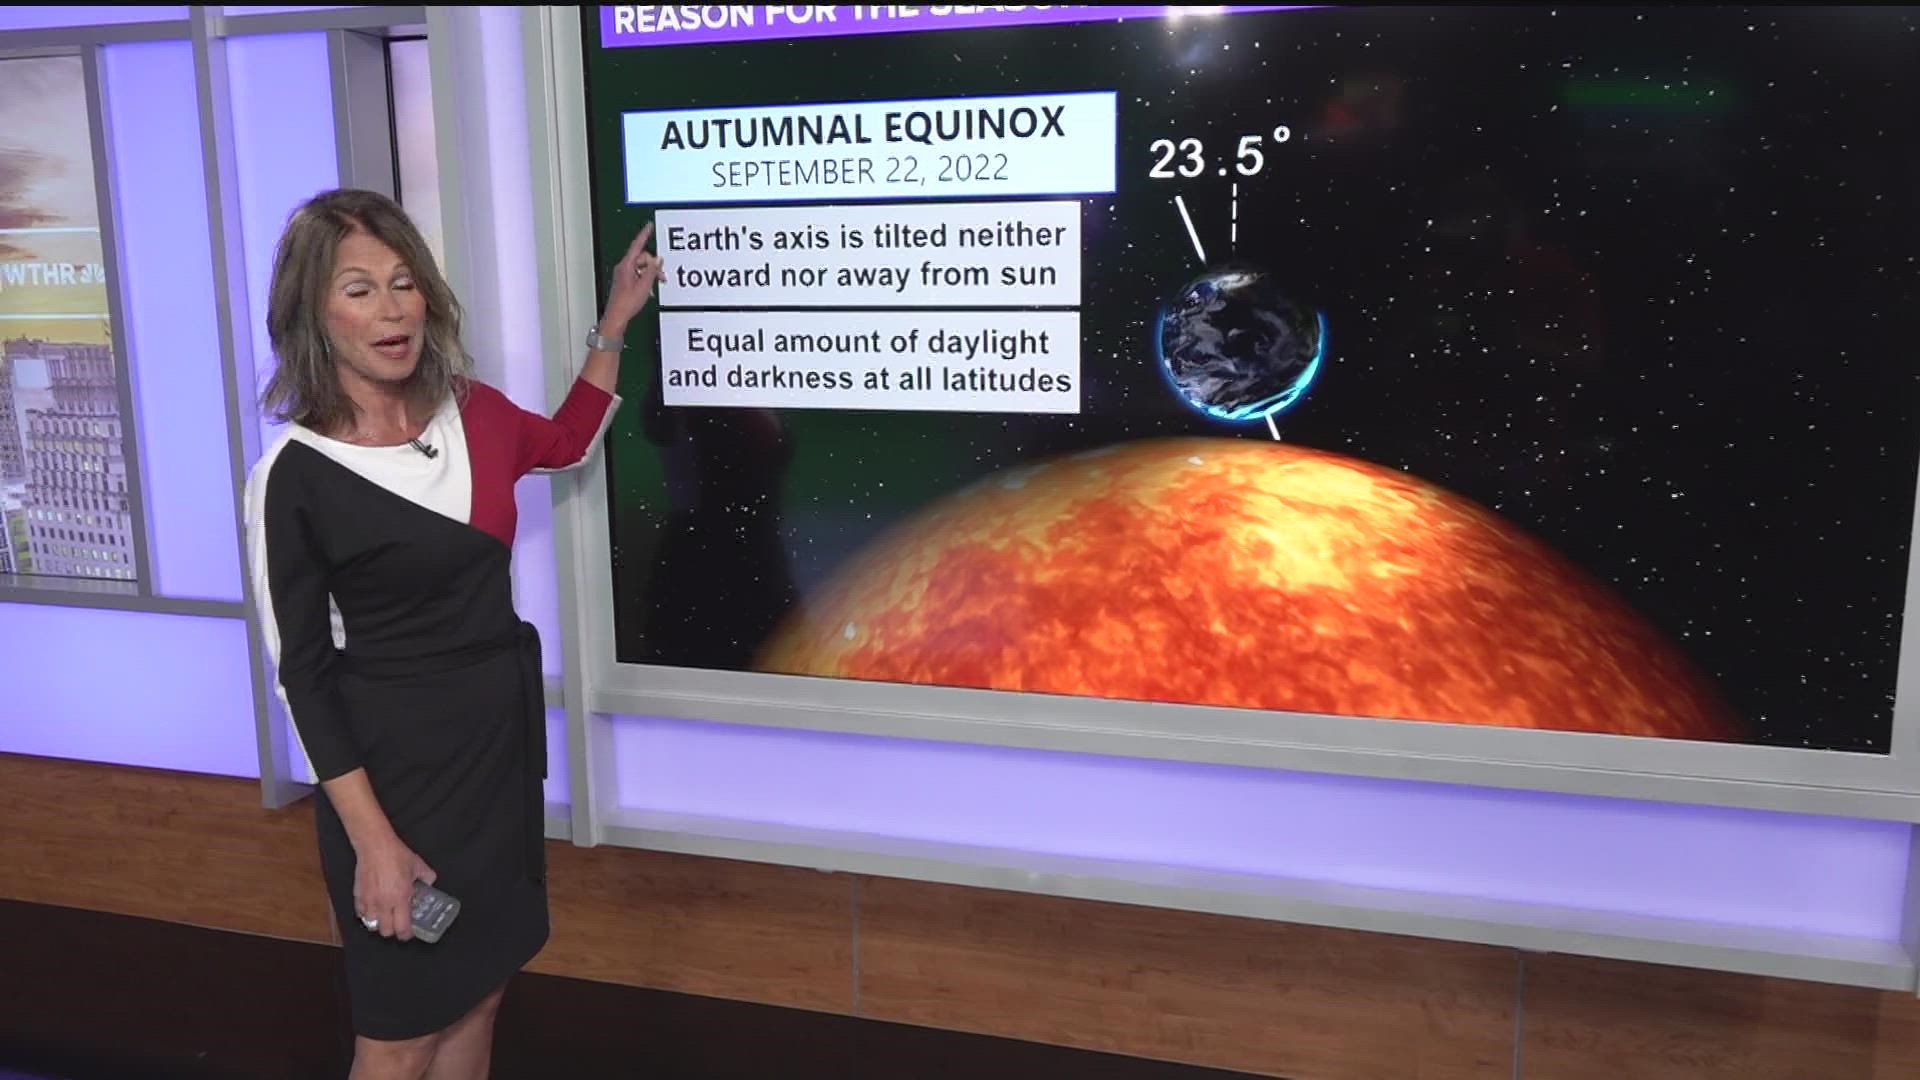 Angela explains how the autumnal equinox signals the first days of fall.